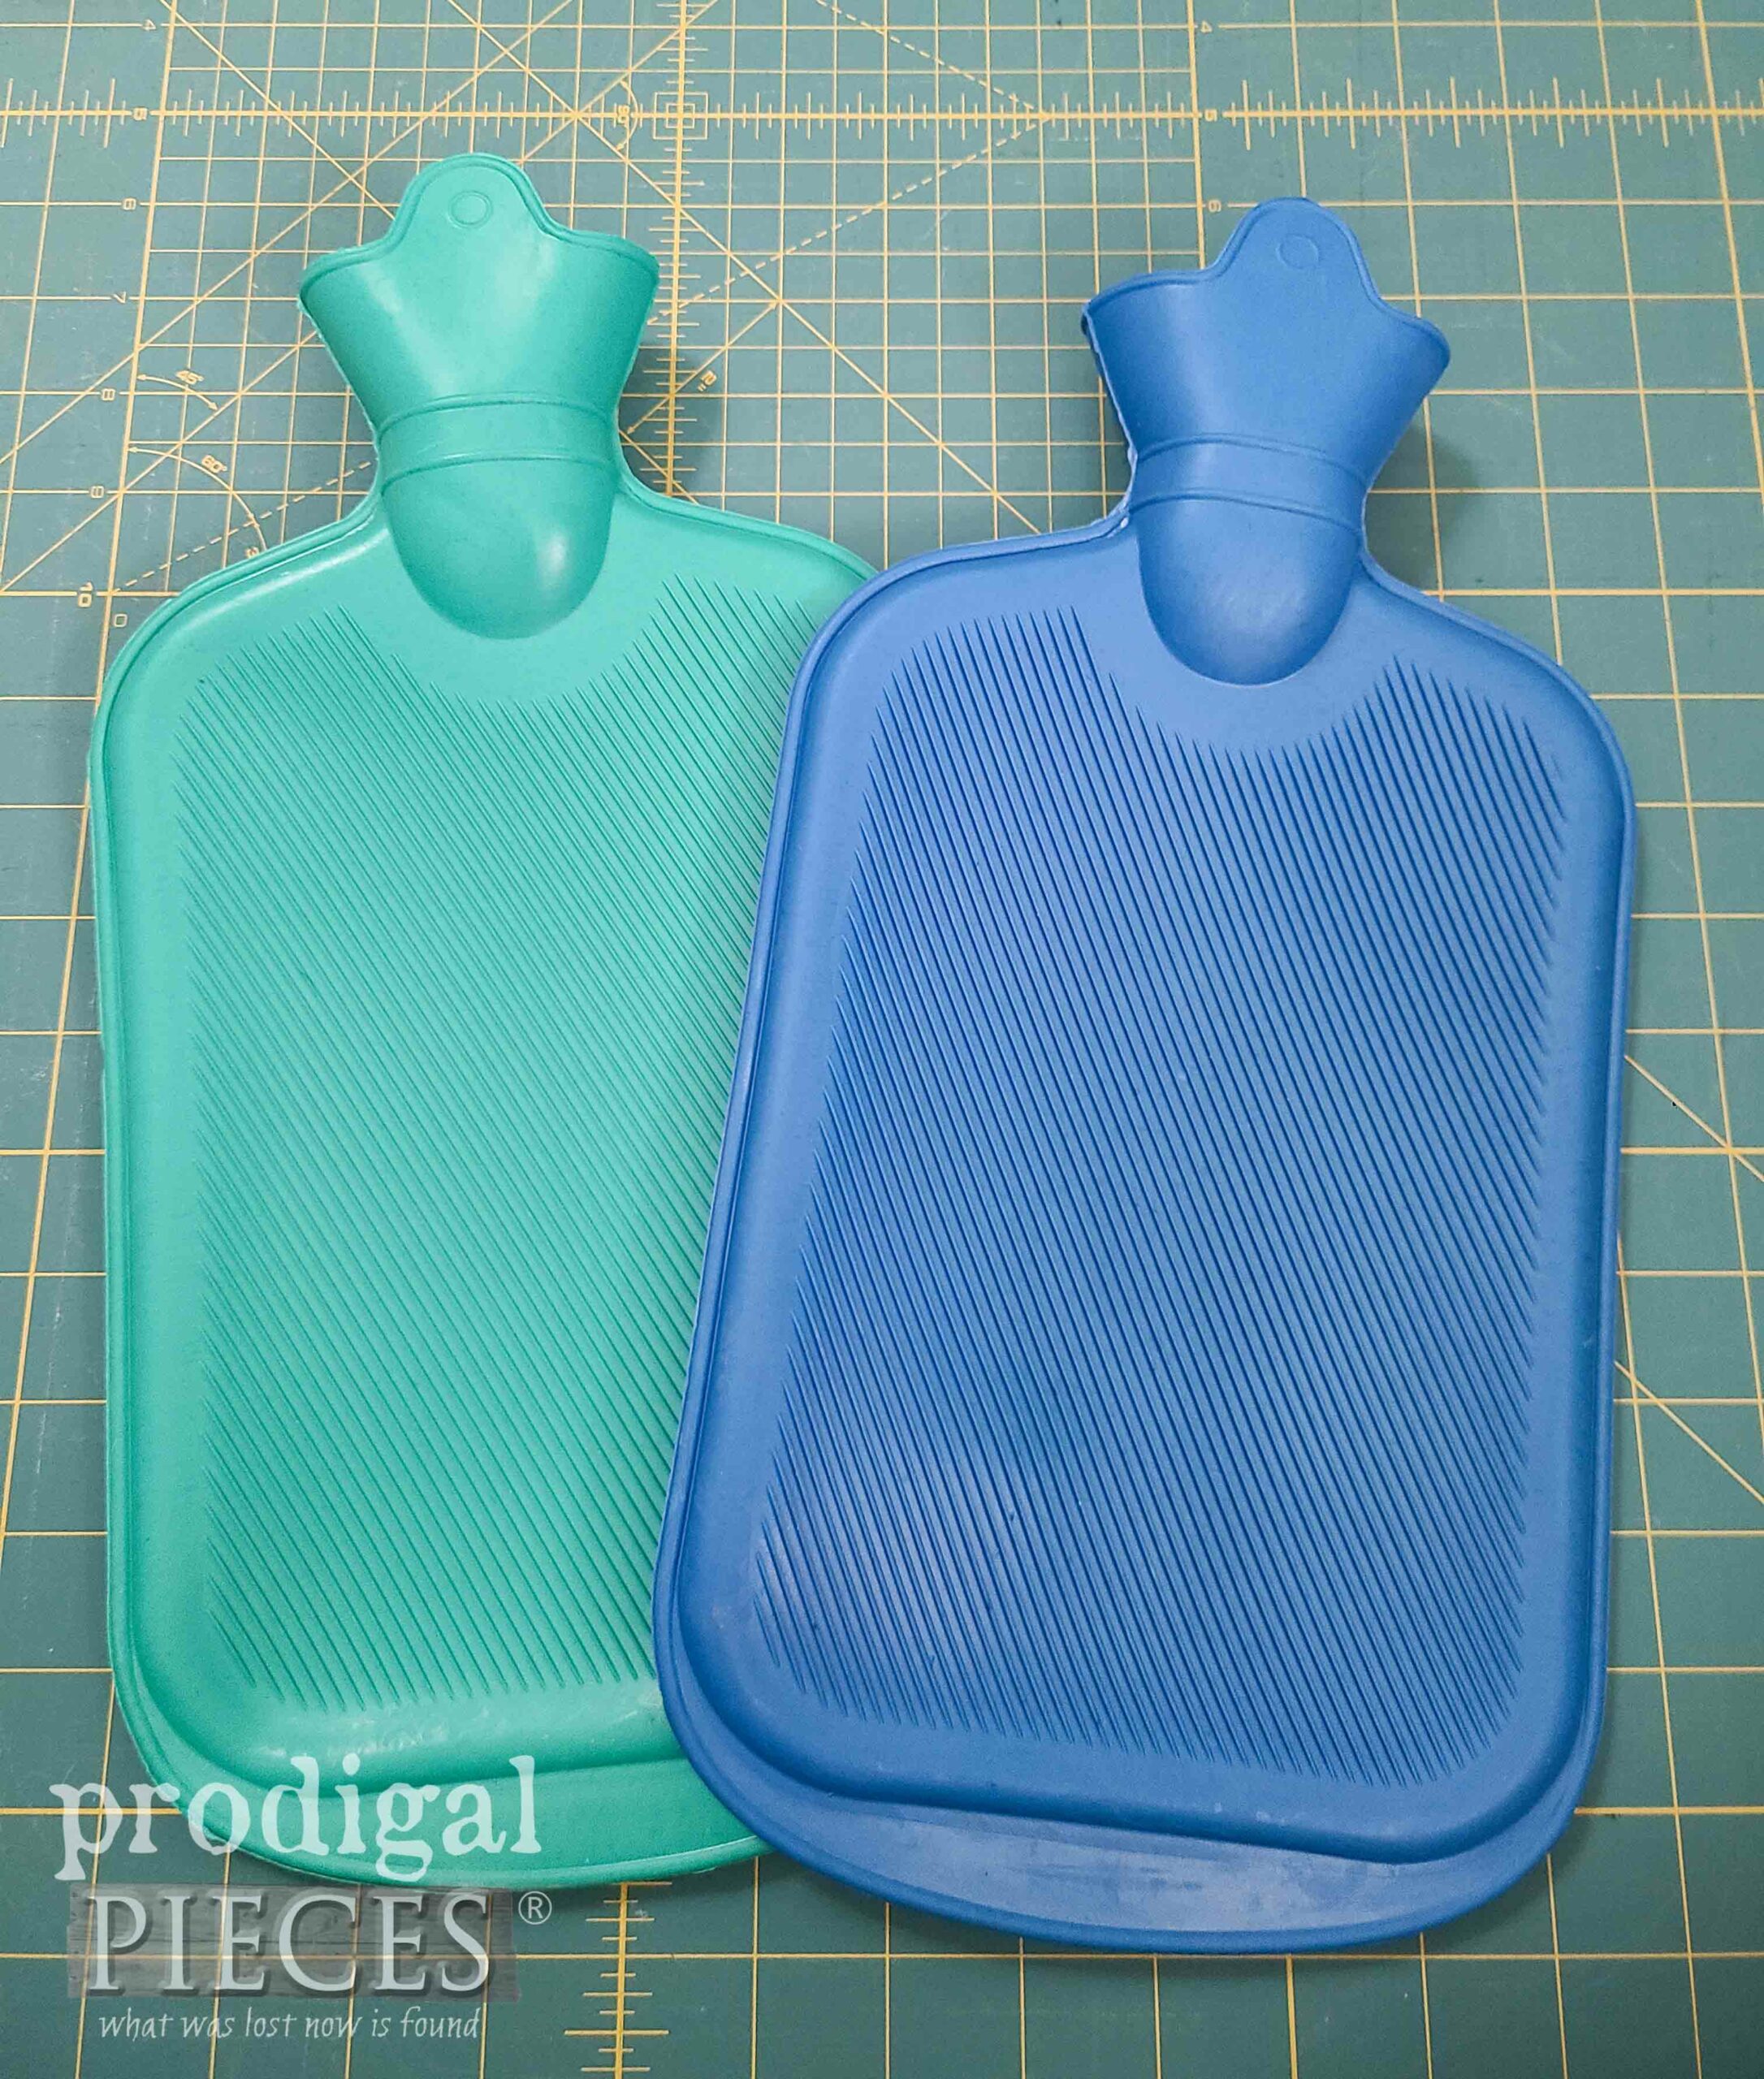 Hot Water Bottle for DIY Bottle Cover from Refashioned Sweaters | prodigalpieces.com #prodigalpieces